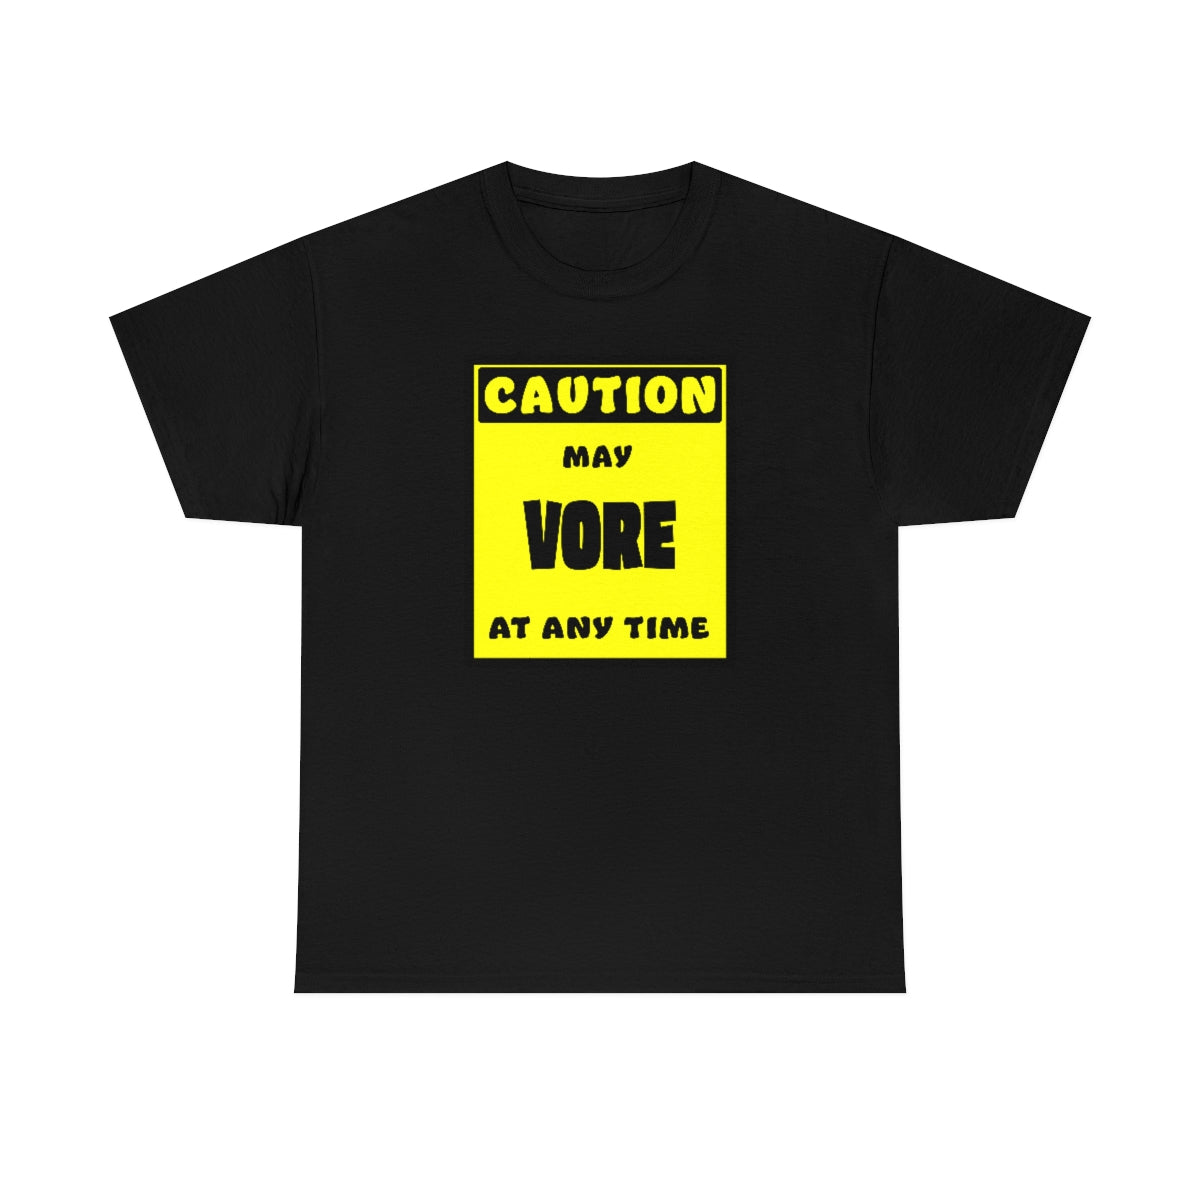 CAUTION! May VORE at any time! - T-Shirt T-Shirt AFLT-Whootorca Black S 